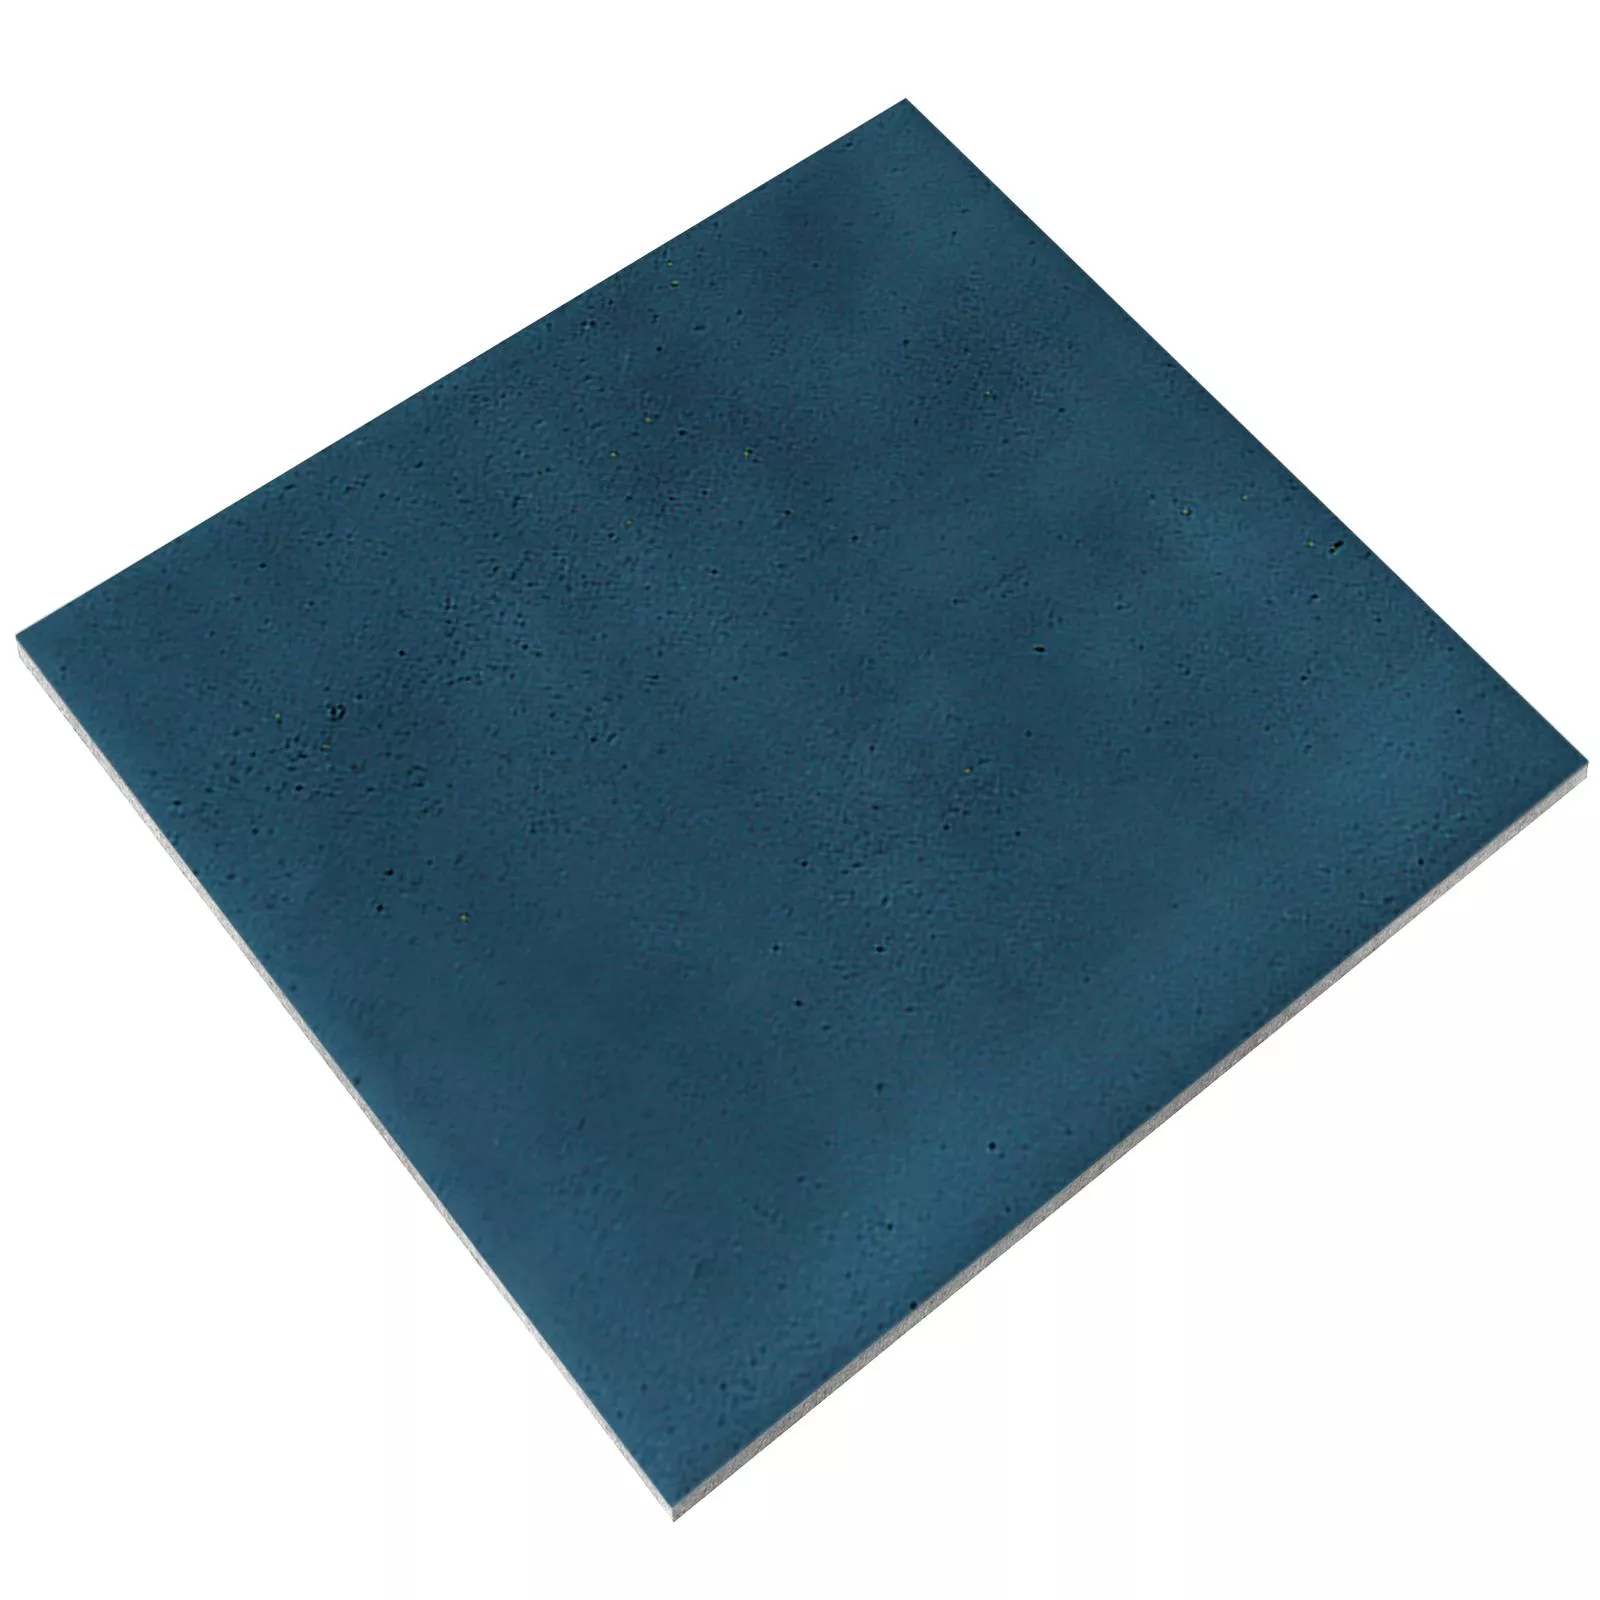 Sample Wall Tile Cap Town Glossy Waved 10x10cm Blue